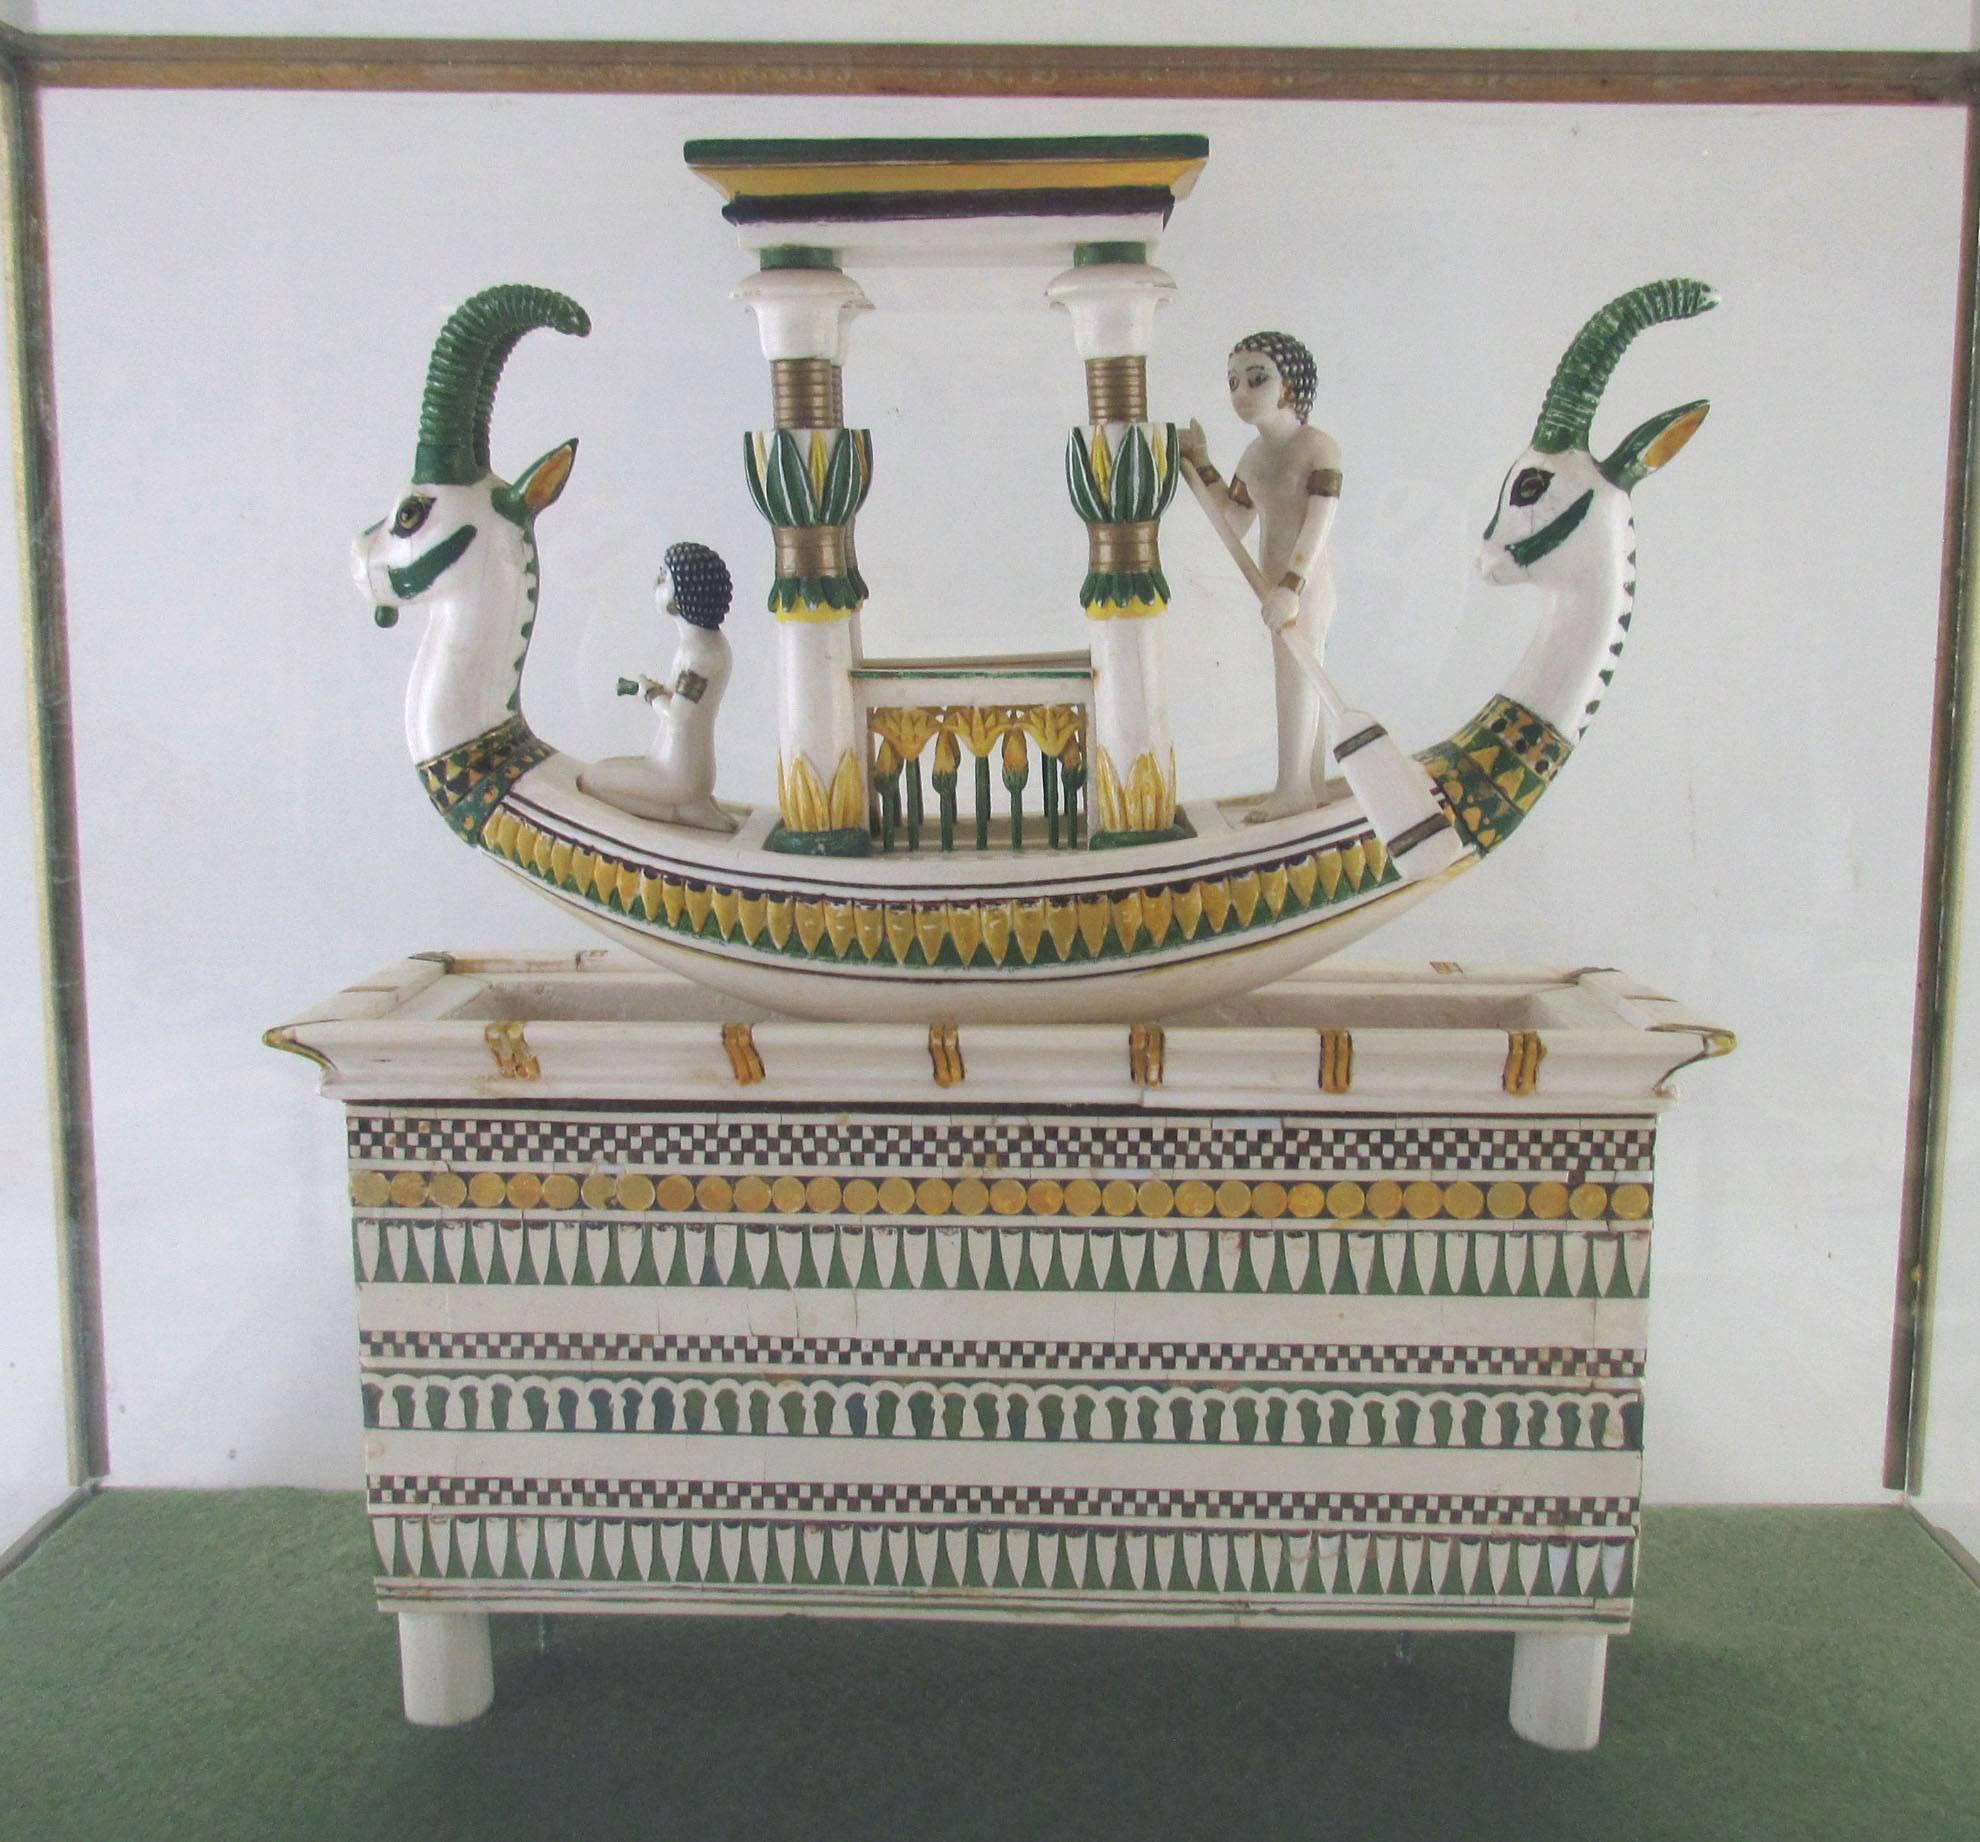 A hand built replica of an Egyptian ceremonial boat unearthed from the tomb of Tutankhamun, considered the earliest known boat model in existence. This meticulously crafted work features individual tile work of hand-painted bone and comes from the